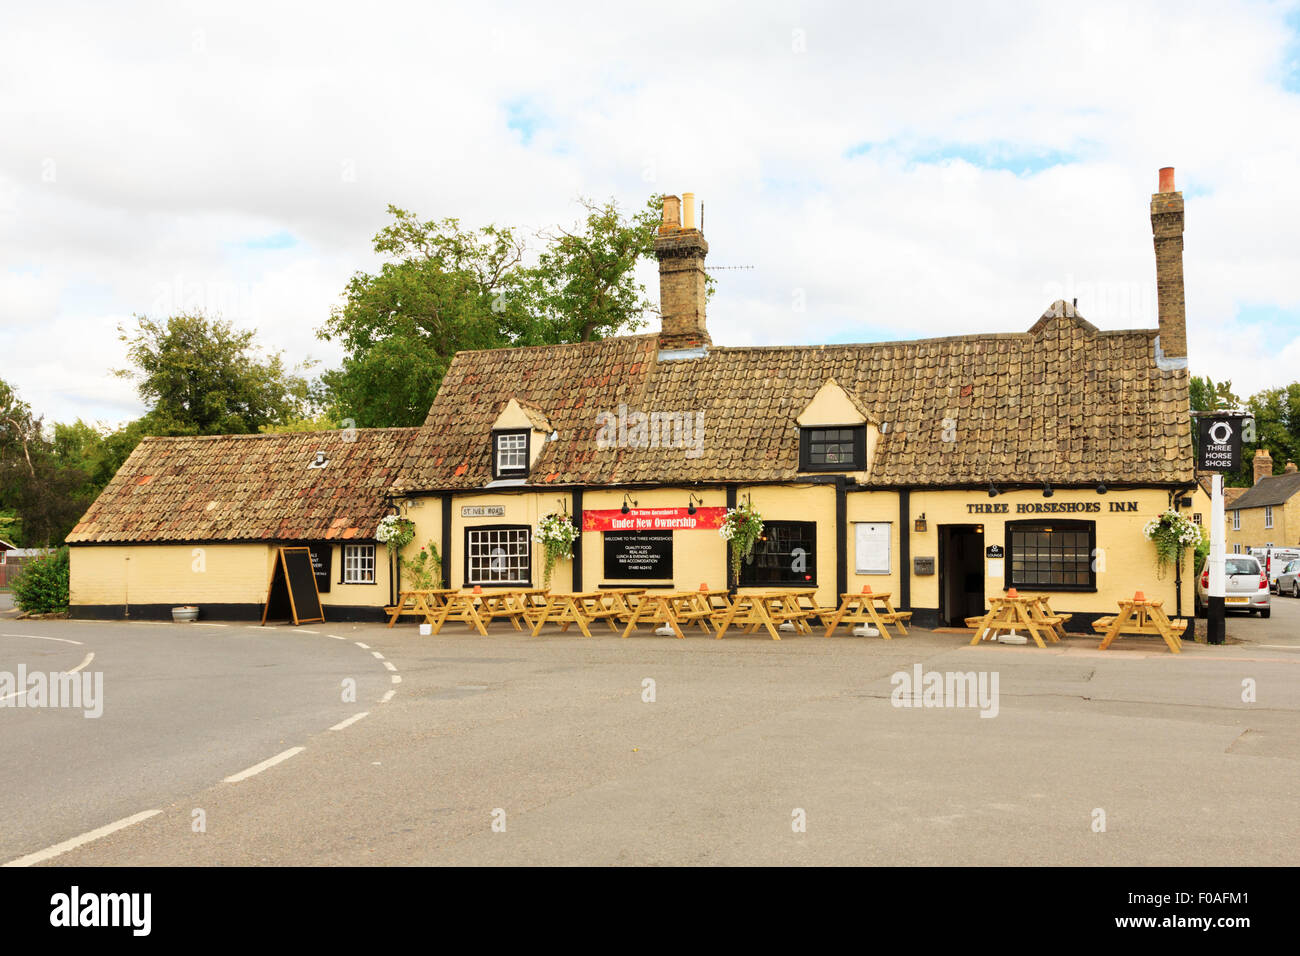 Three Horseshoes Inn, Houghton avec Wyton, Huntingdon, Cambs Banque D'Images